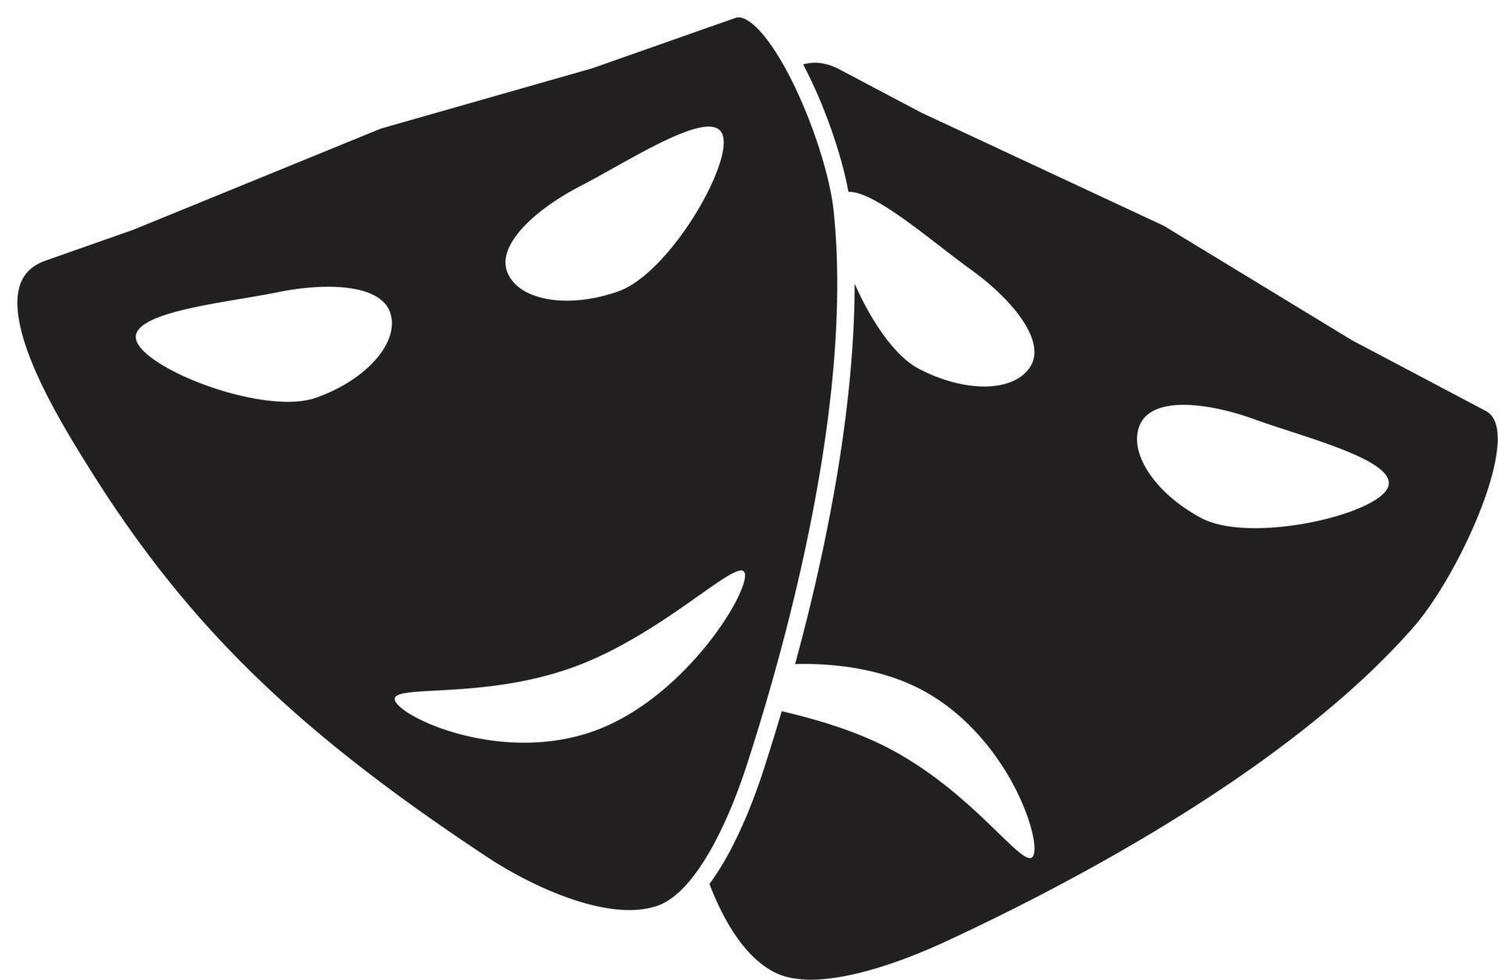 Theater masks icon. flat style. Theater masks sign. art symbol. vector